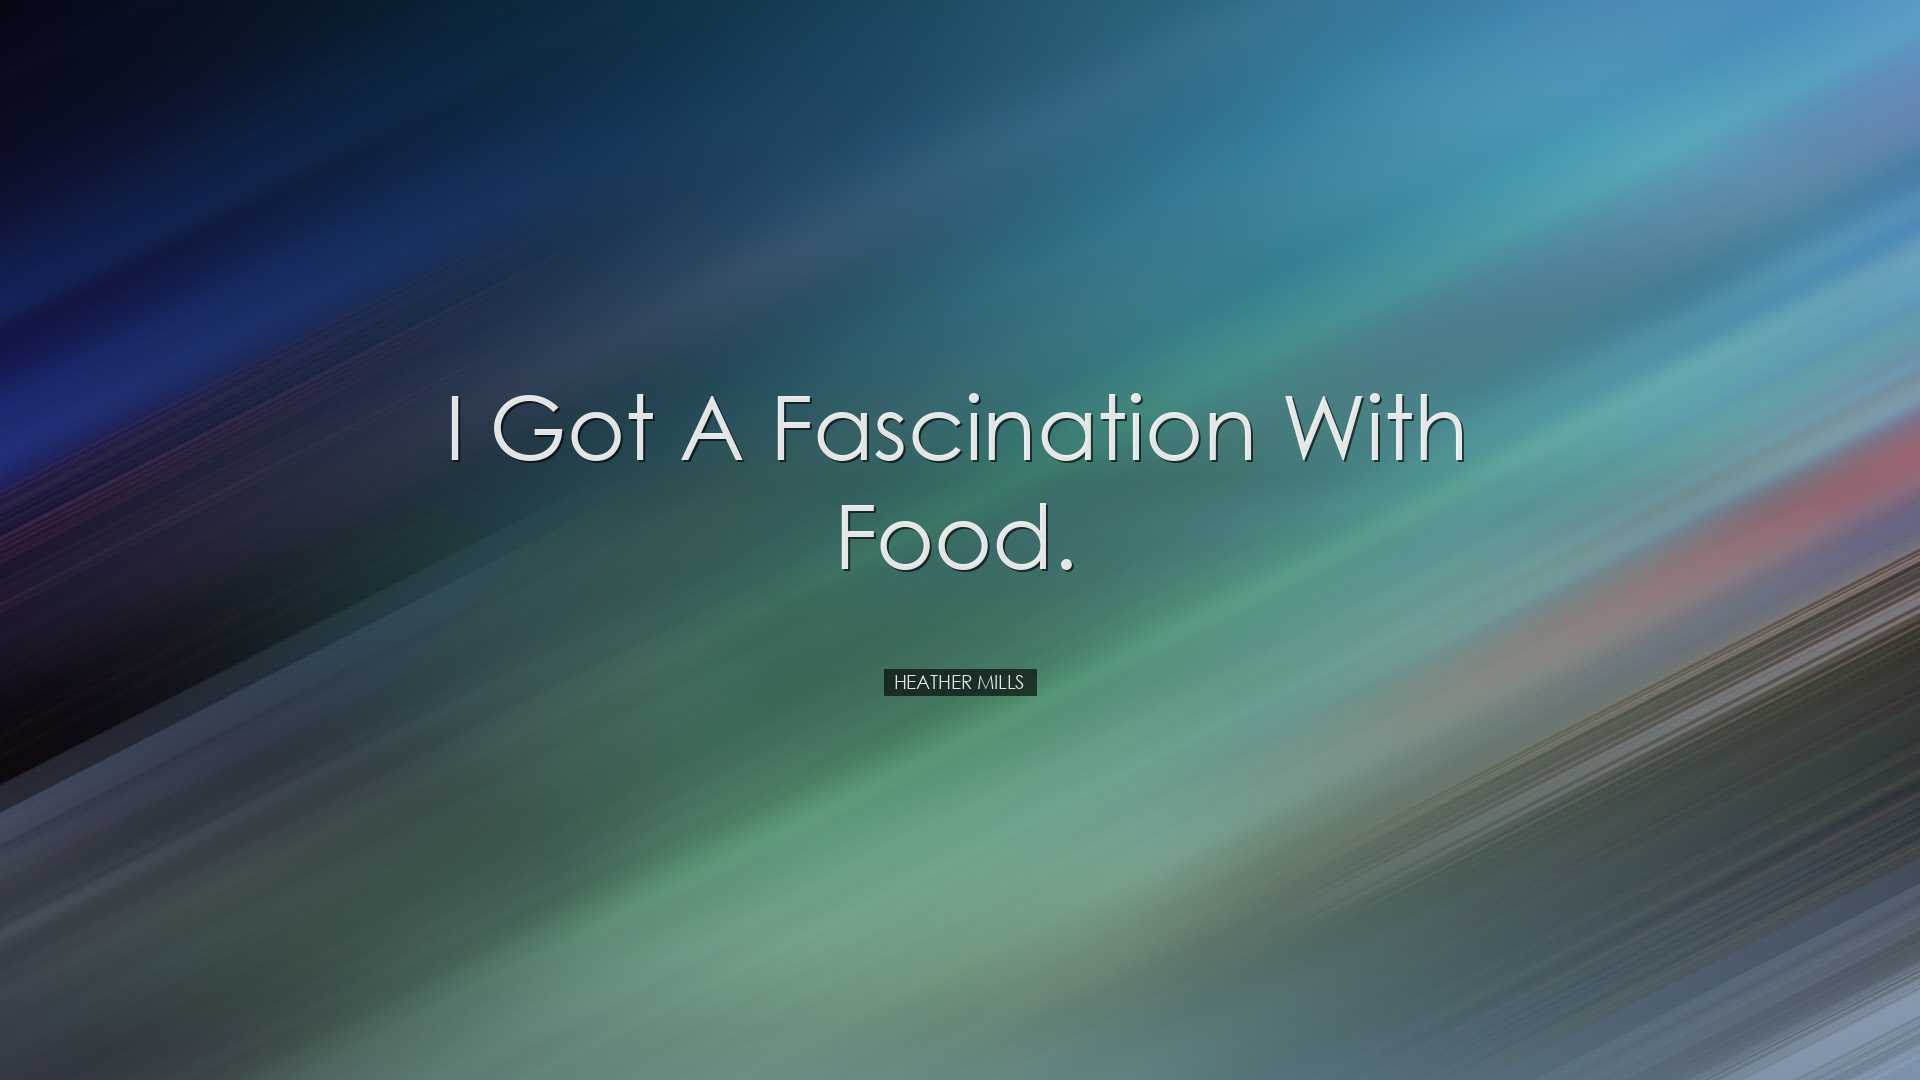 I got a fascination with food. - Heather Mills